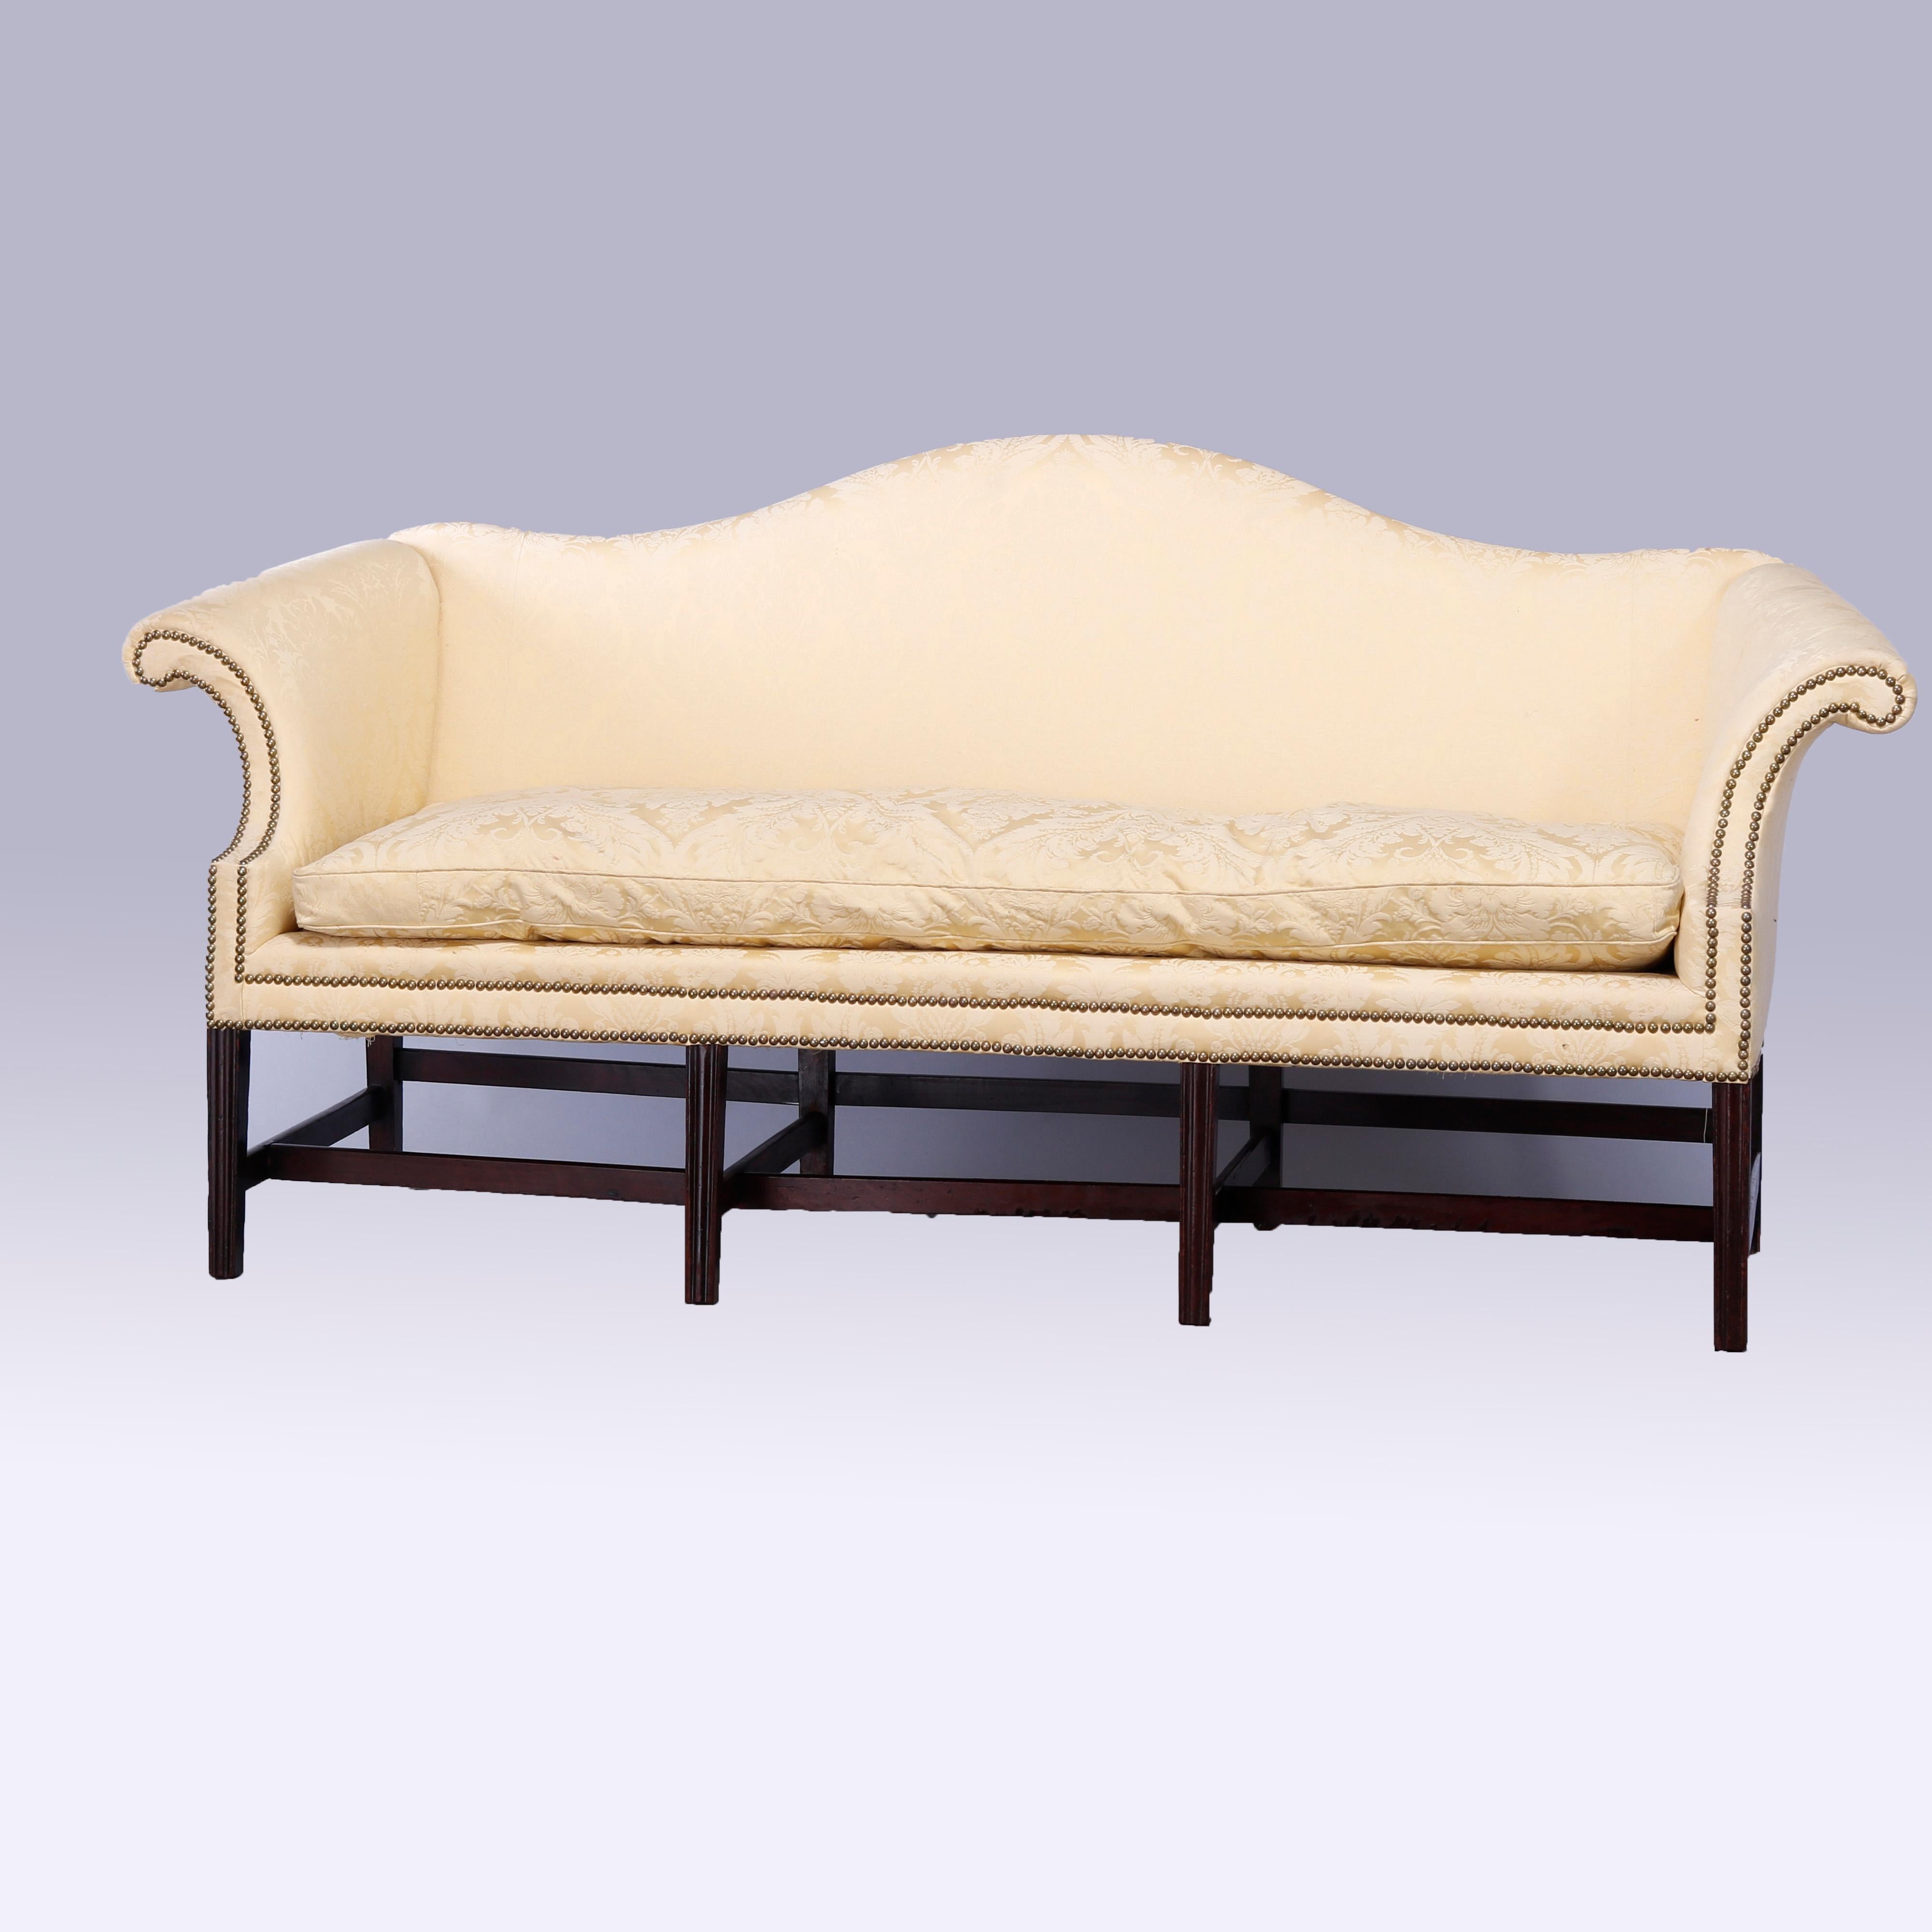 An antique Chippendale sofa offers upholstered camel back form with scroll arms and down cushion on walnut frame having eight square and straight legs, c1810

Measures - 38.75'' H x 81.5'' W x 31'' D; seat height 16